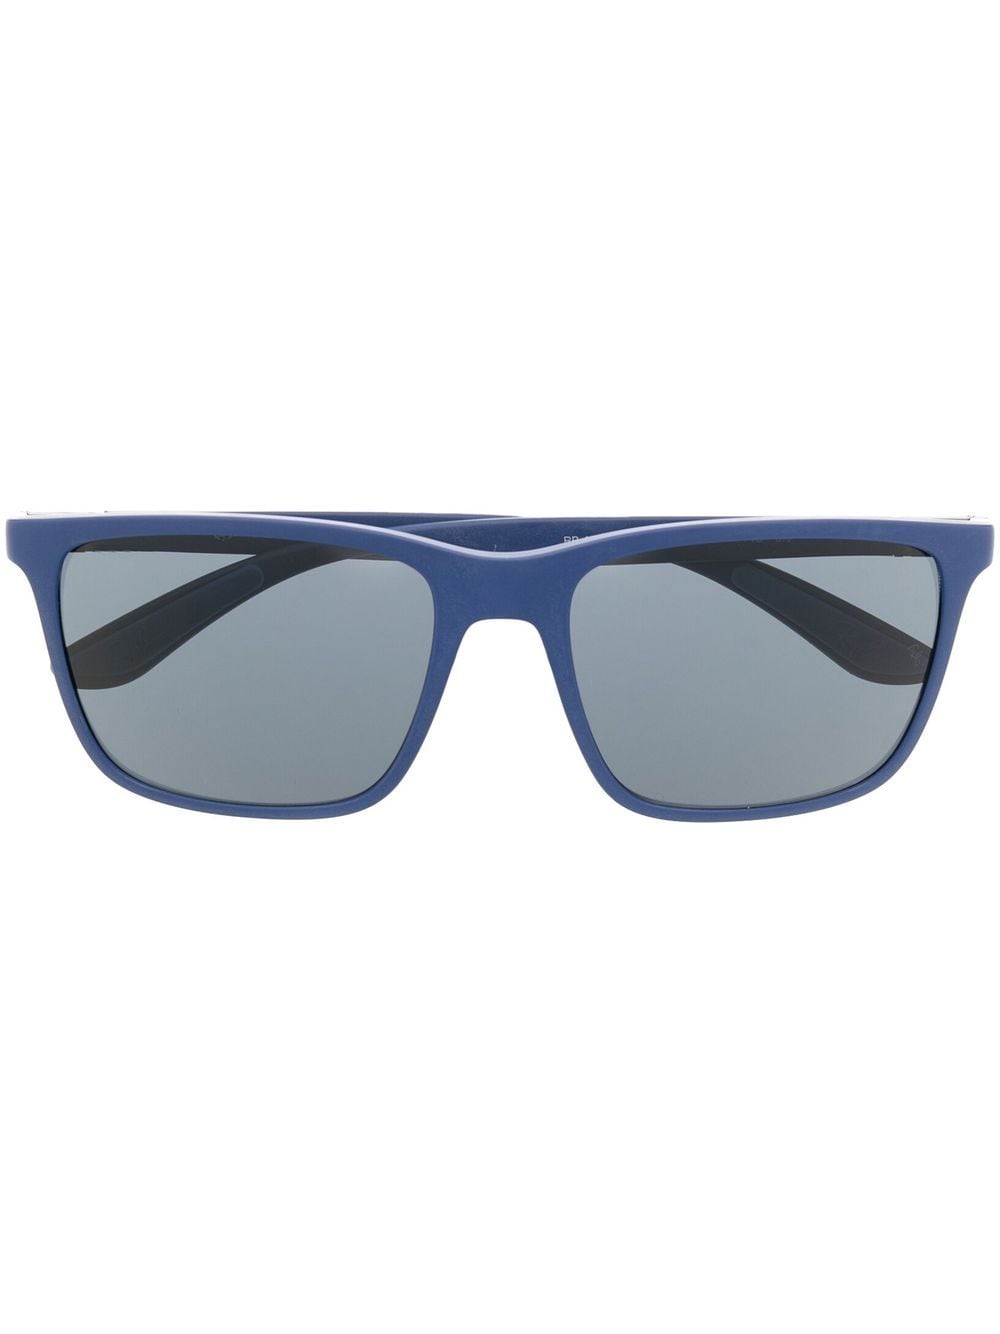 Ray-Ban rectangle-frame sunglasses - Blue von Ray-Ban